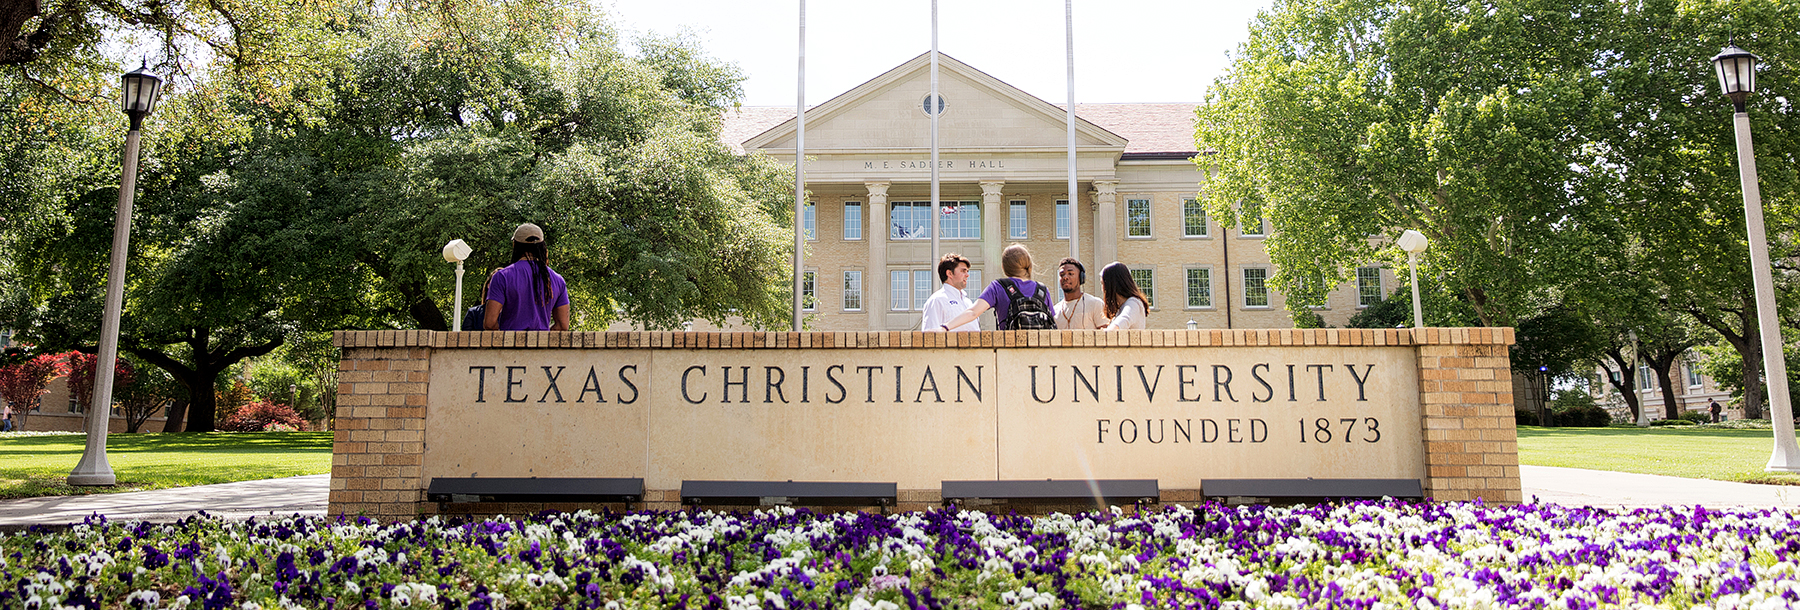 Section Image: TCU sign with students 